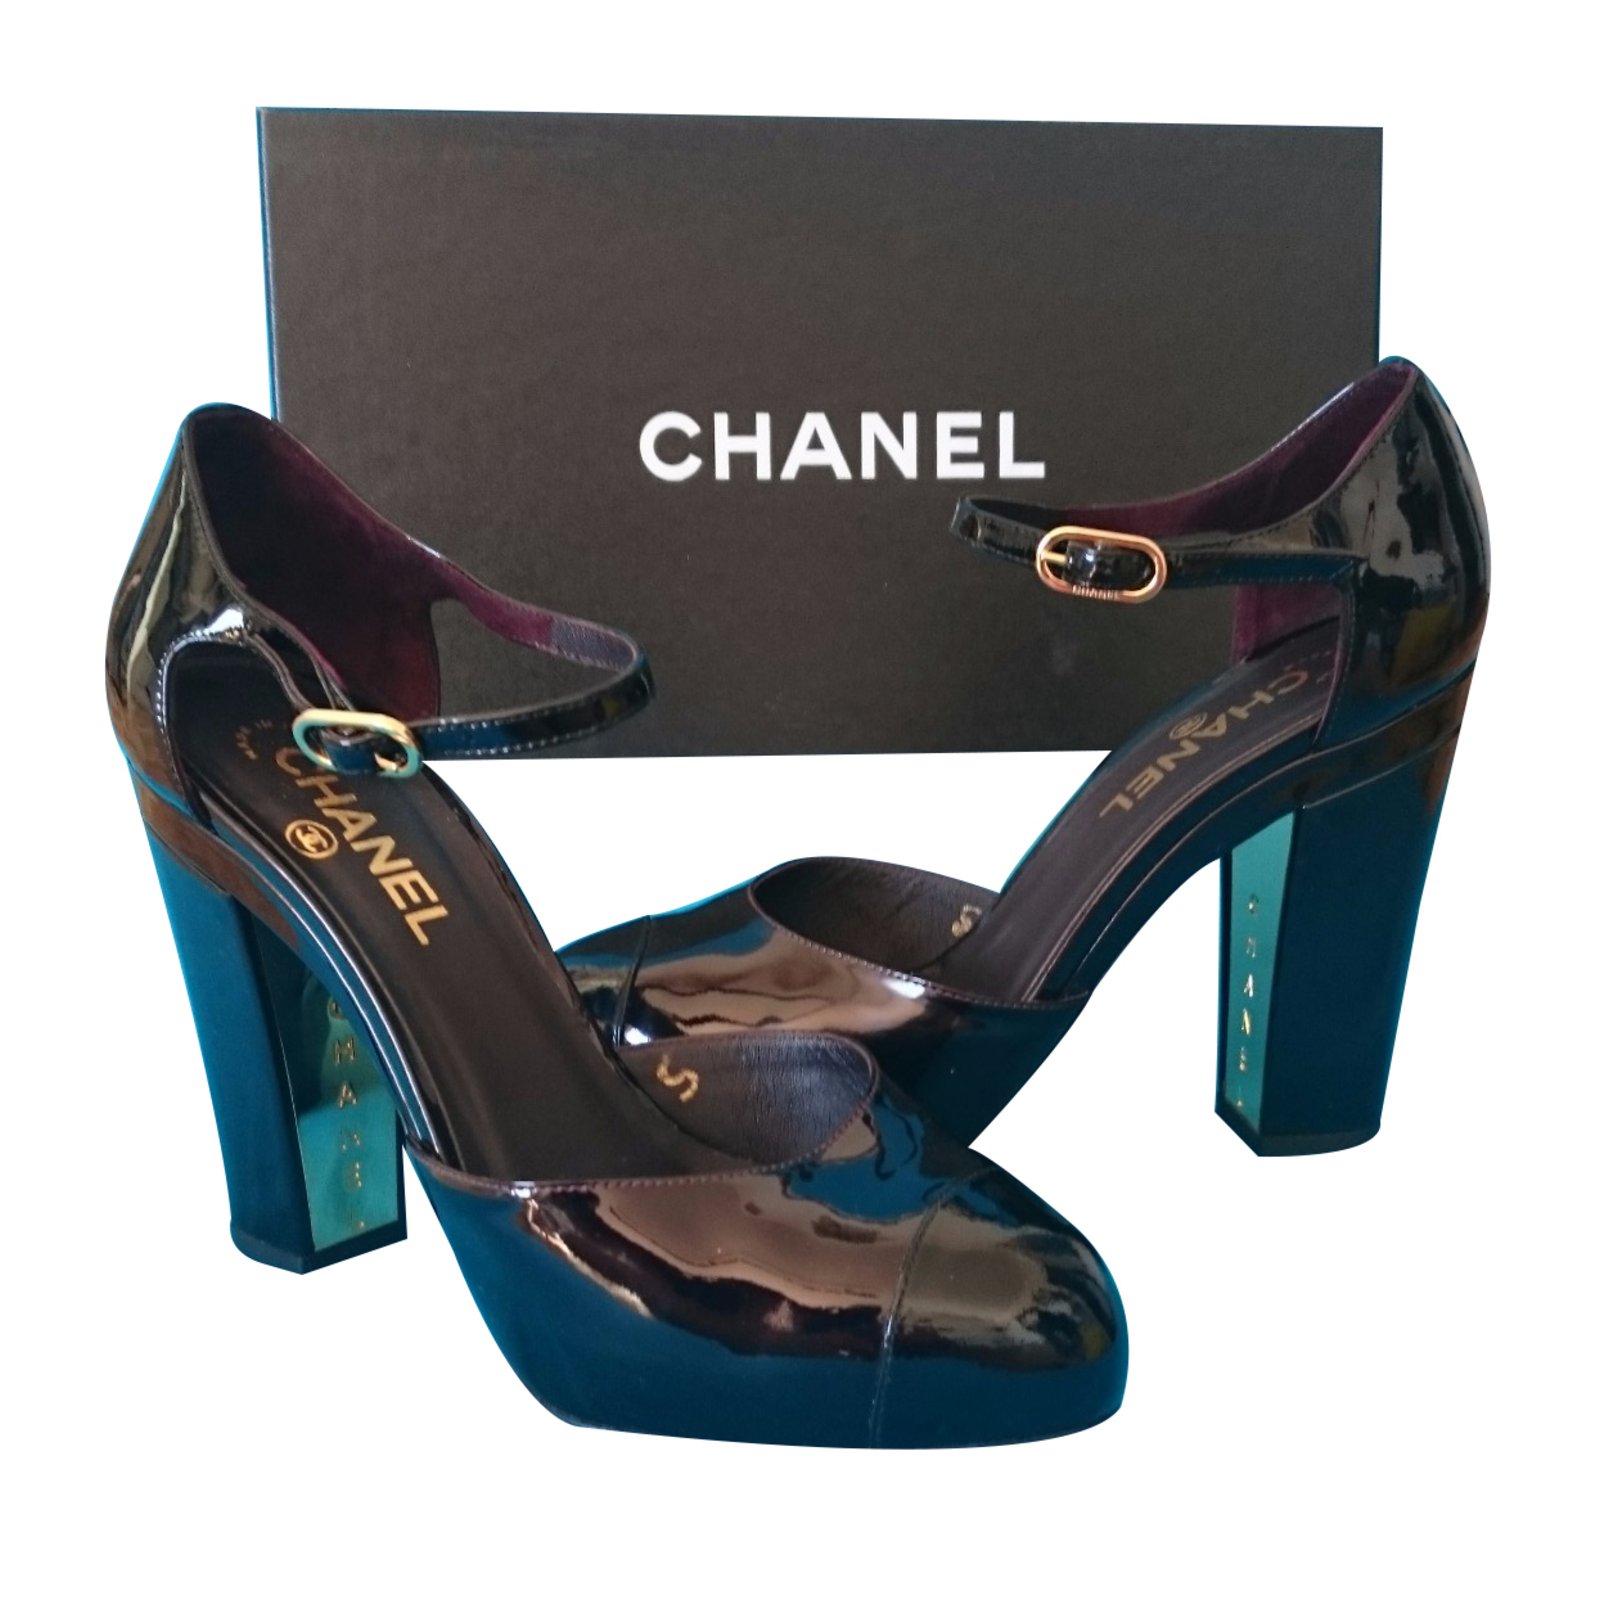 Patent leather heels Chanel Black size 38 EU in Patent leather